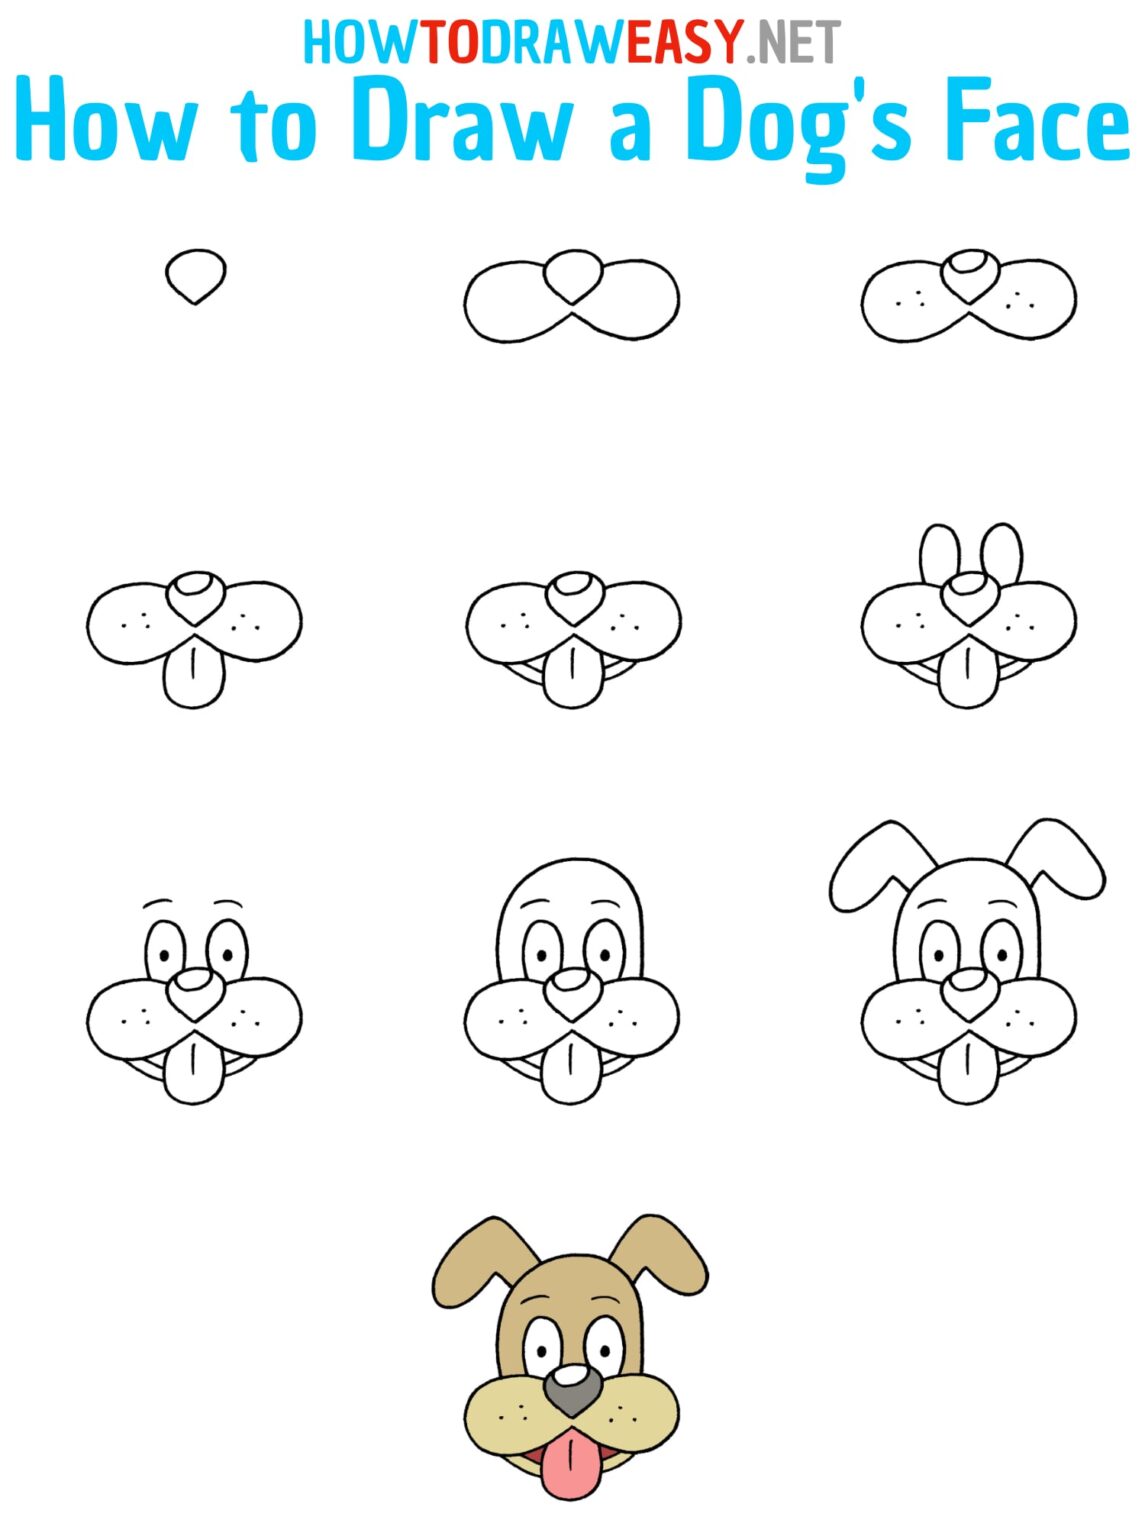 How to Draw a Dog's Face for Kids - How to Draw Easy